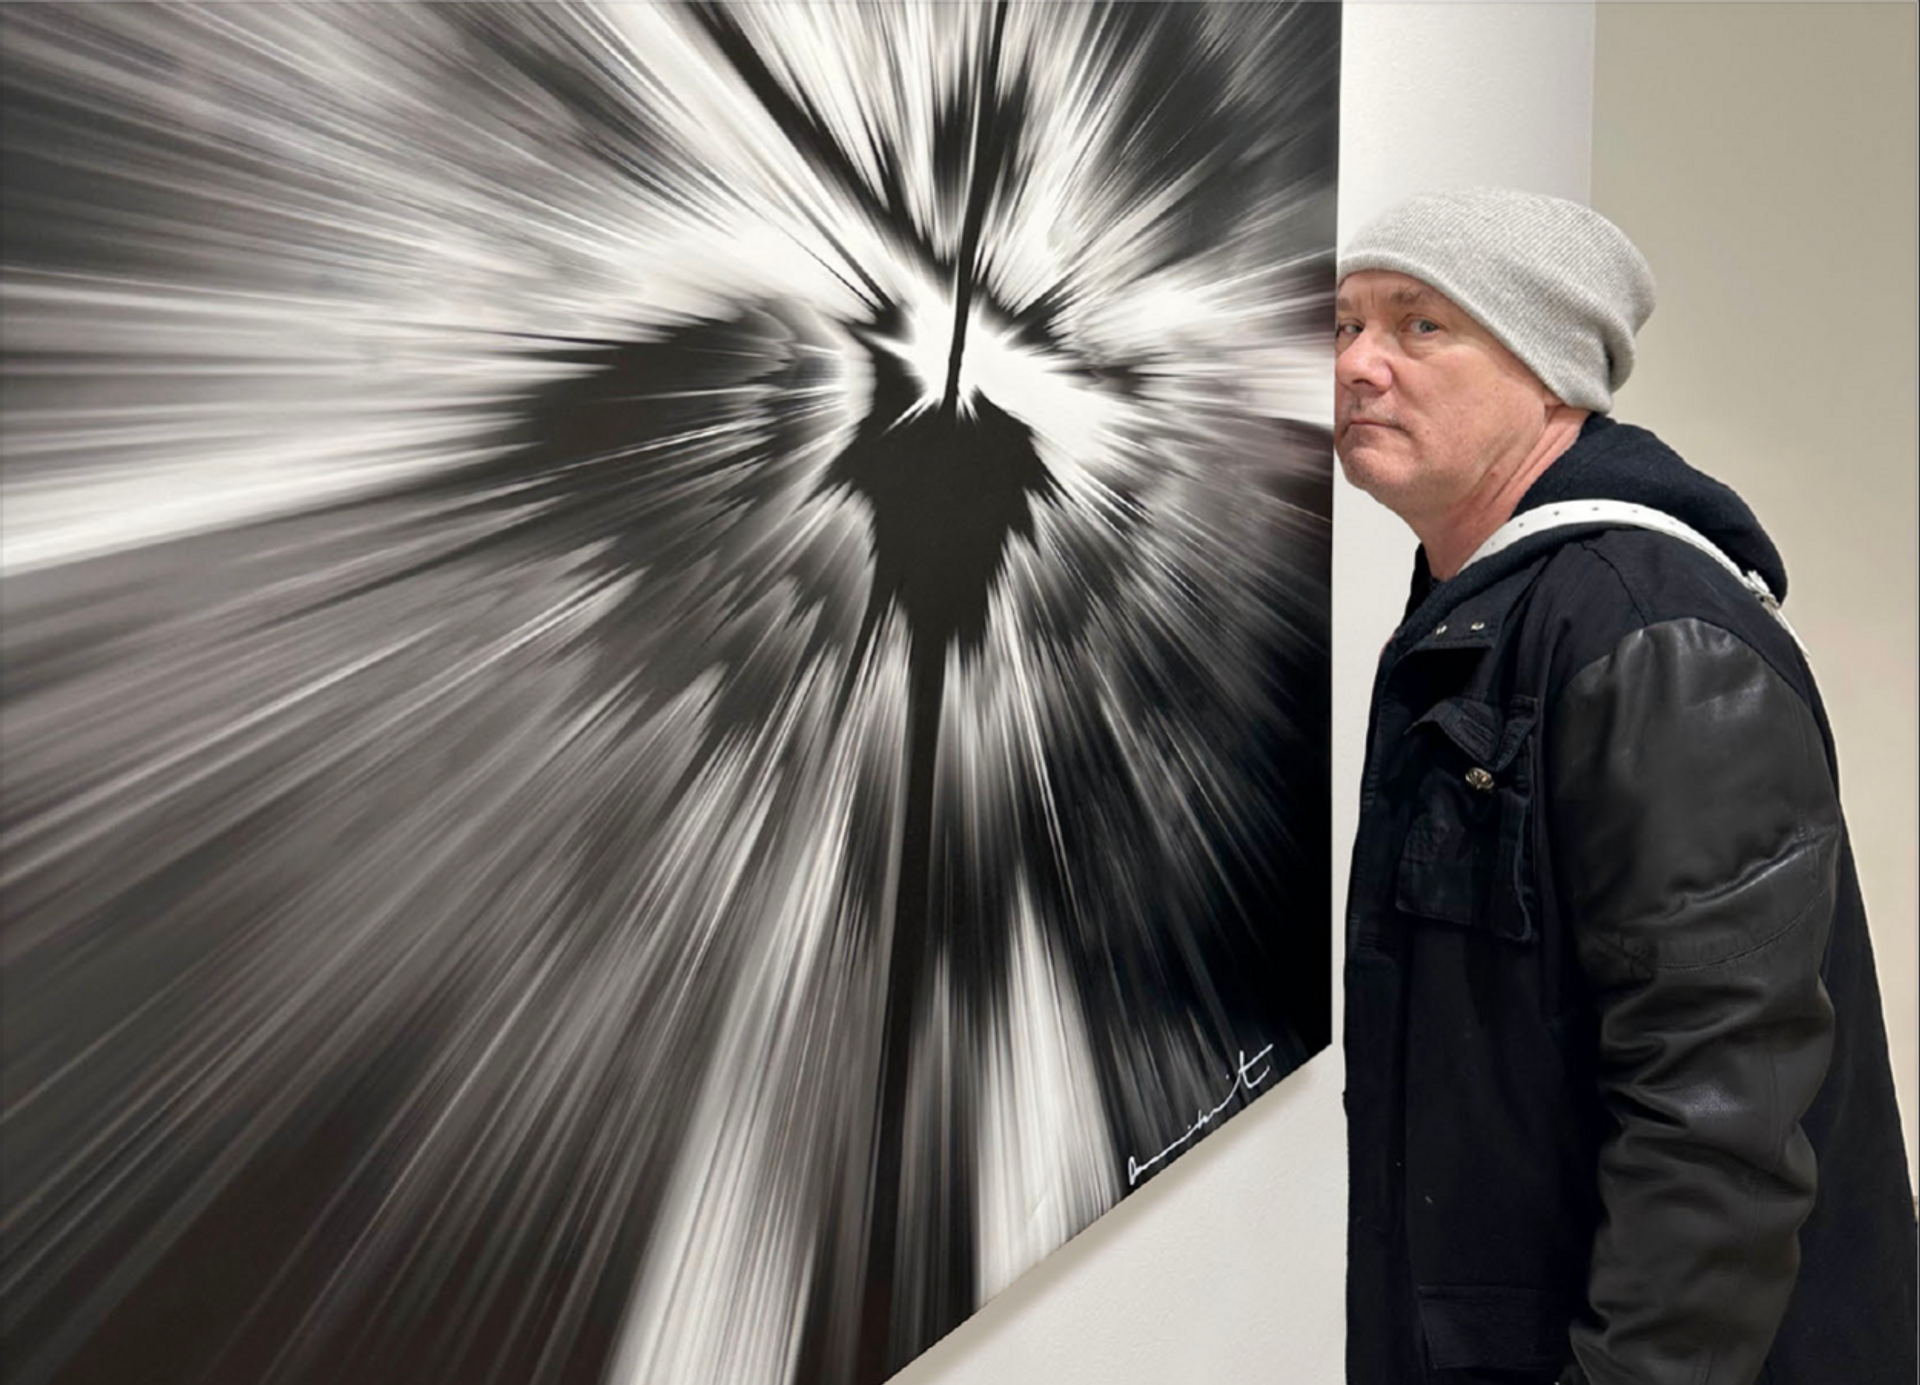 Artist Damien Hirst, dressed in a black leather jacket, standing next to one of his Spin Paintings. The printed artwork is in square format, and is composed of black and white, wit the artist's signature in the bottom right corner.